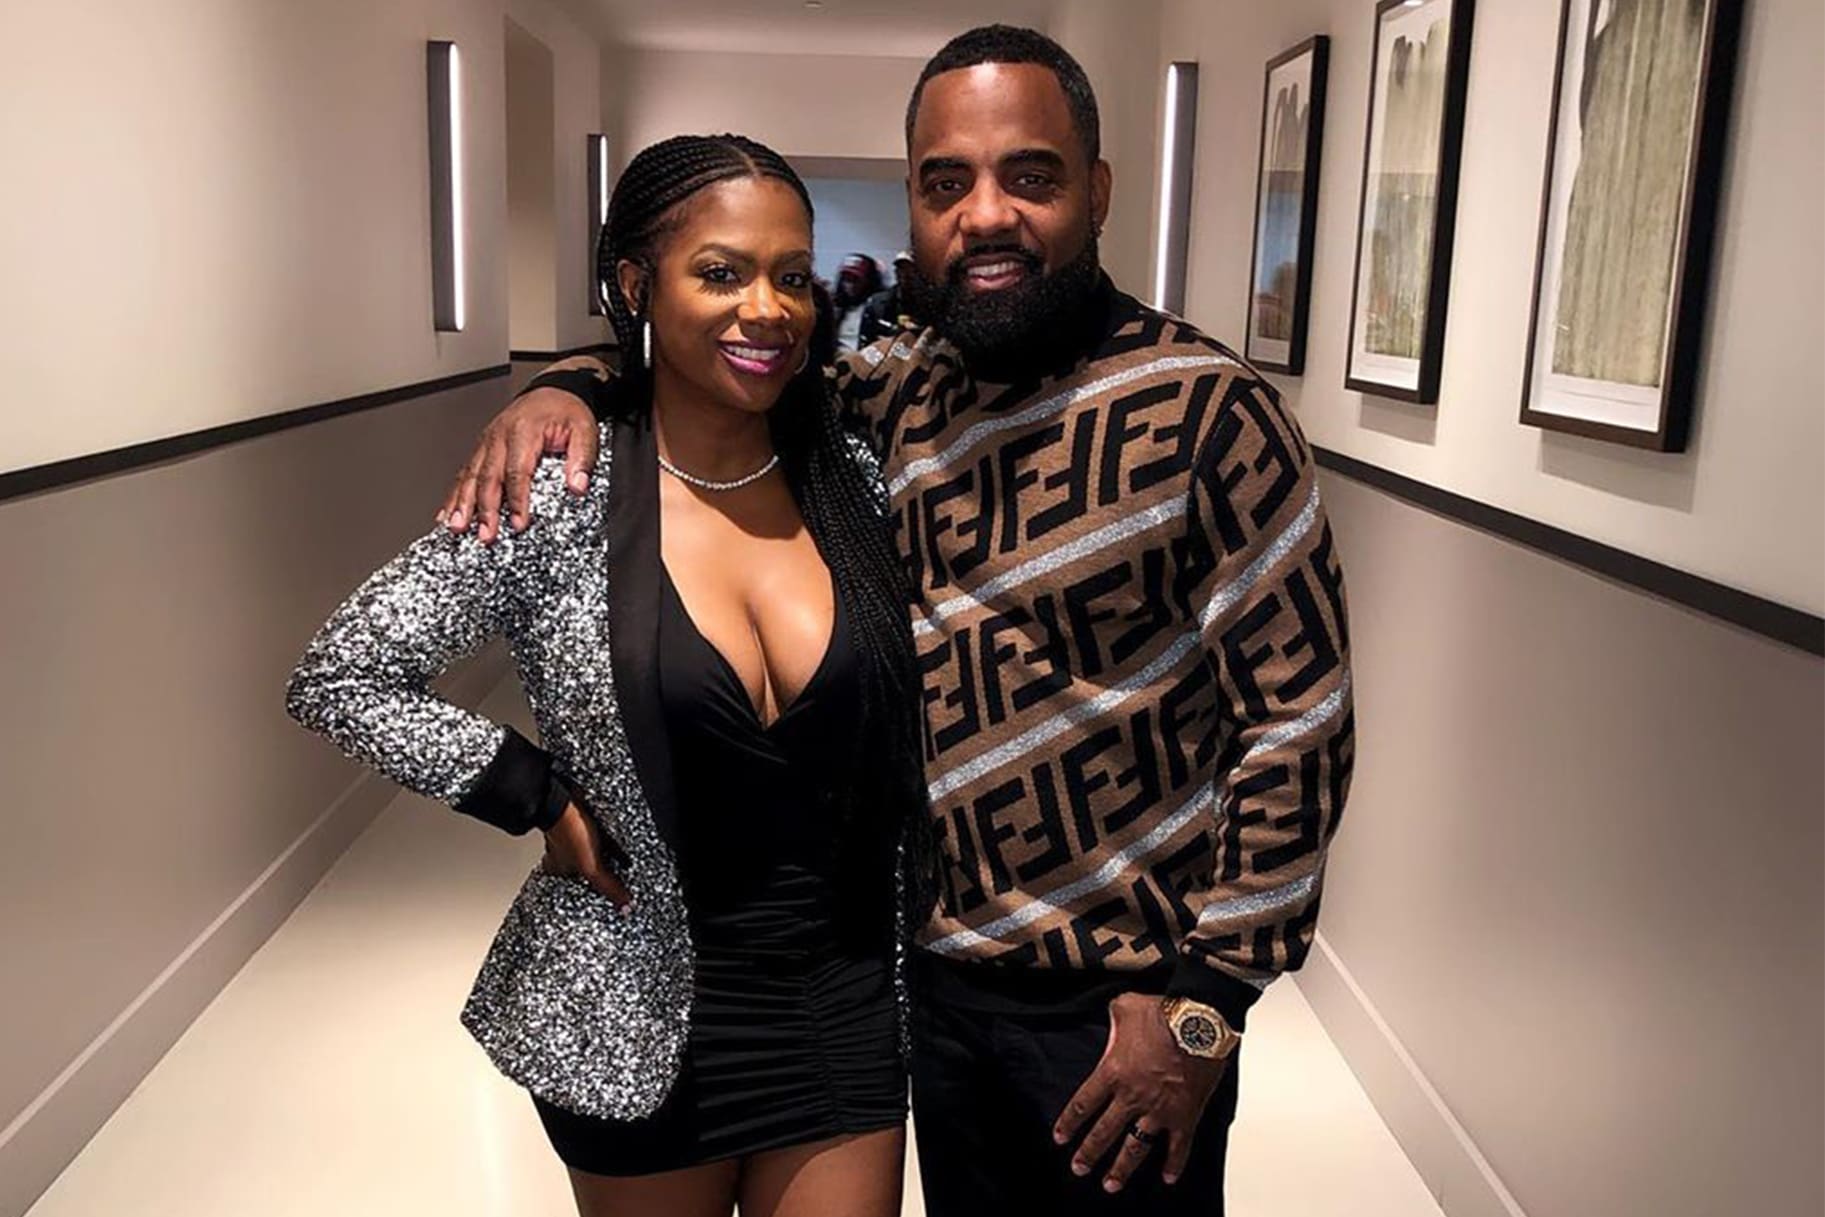 Kandi Burruss' Husband, Todd Tucker Makes Fans Laugh With This Photo